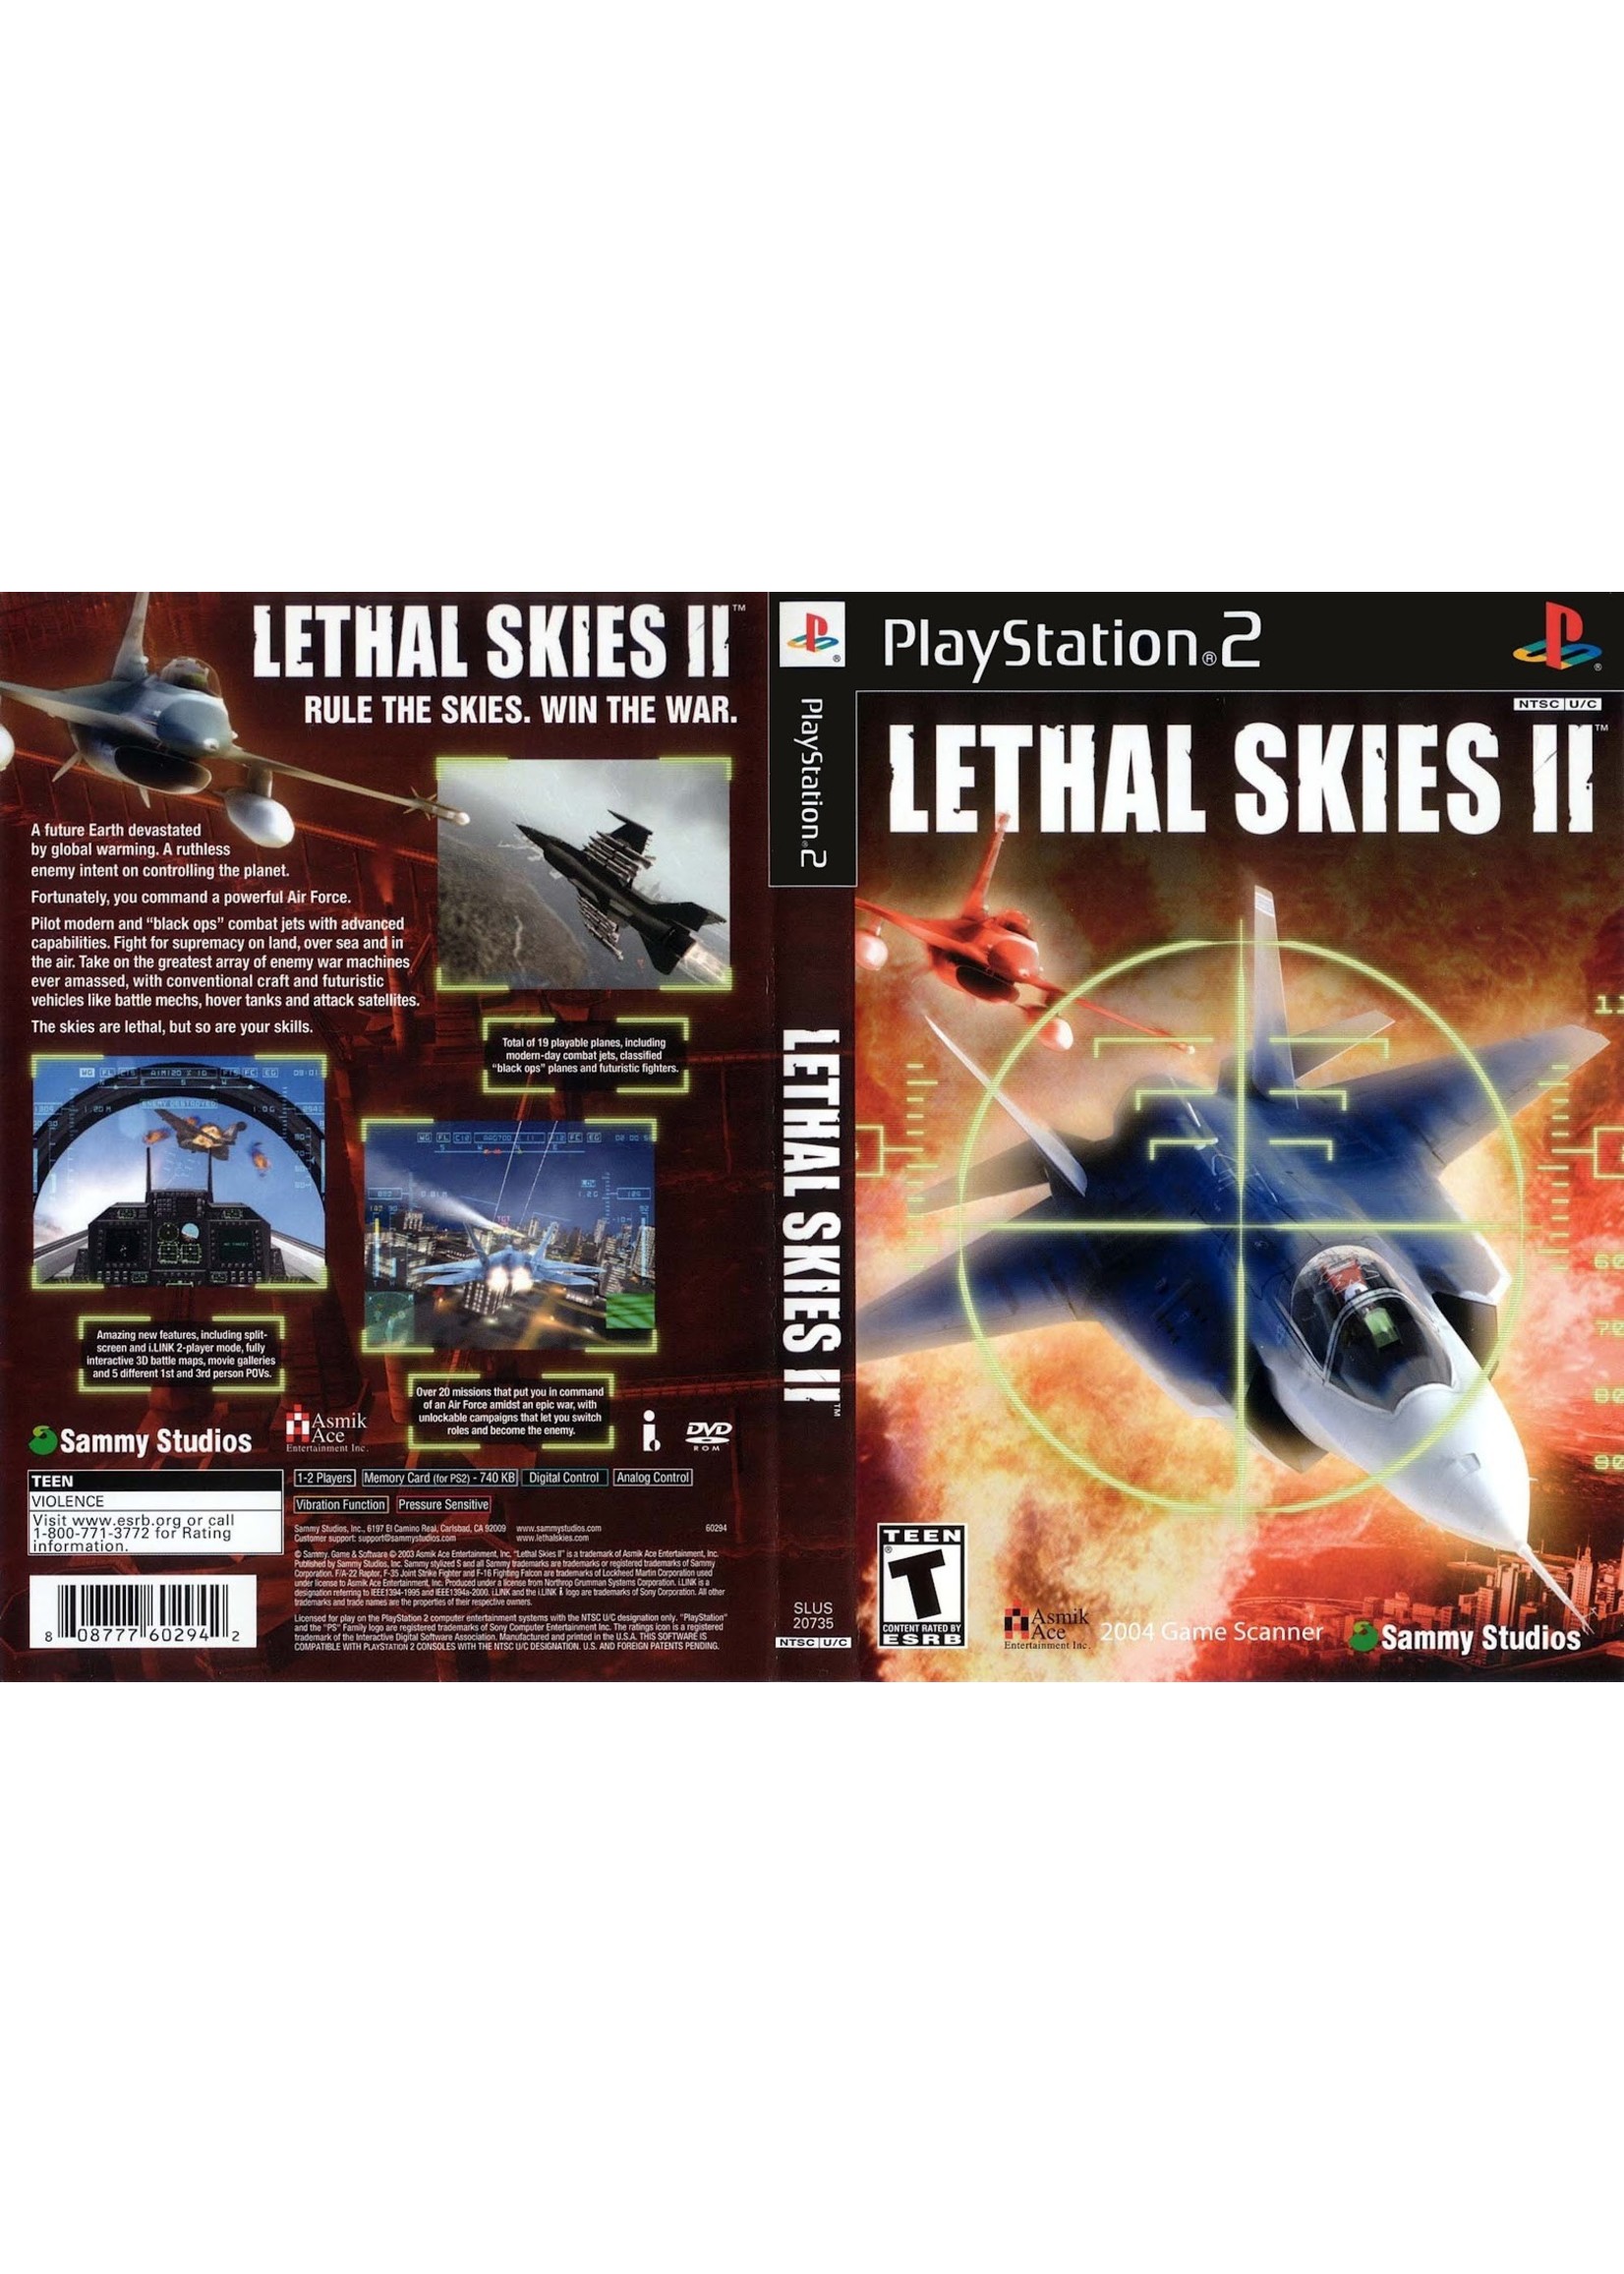 Sony Playstation 2 (PS2) Lethal Skies II